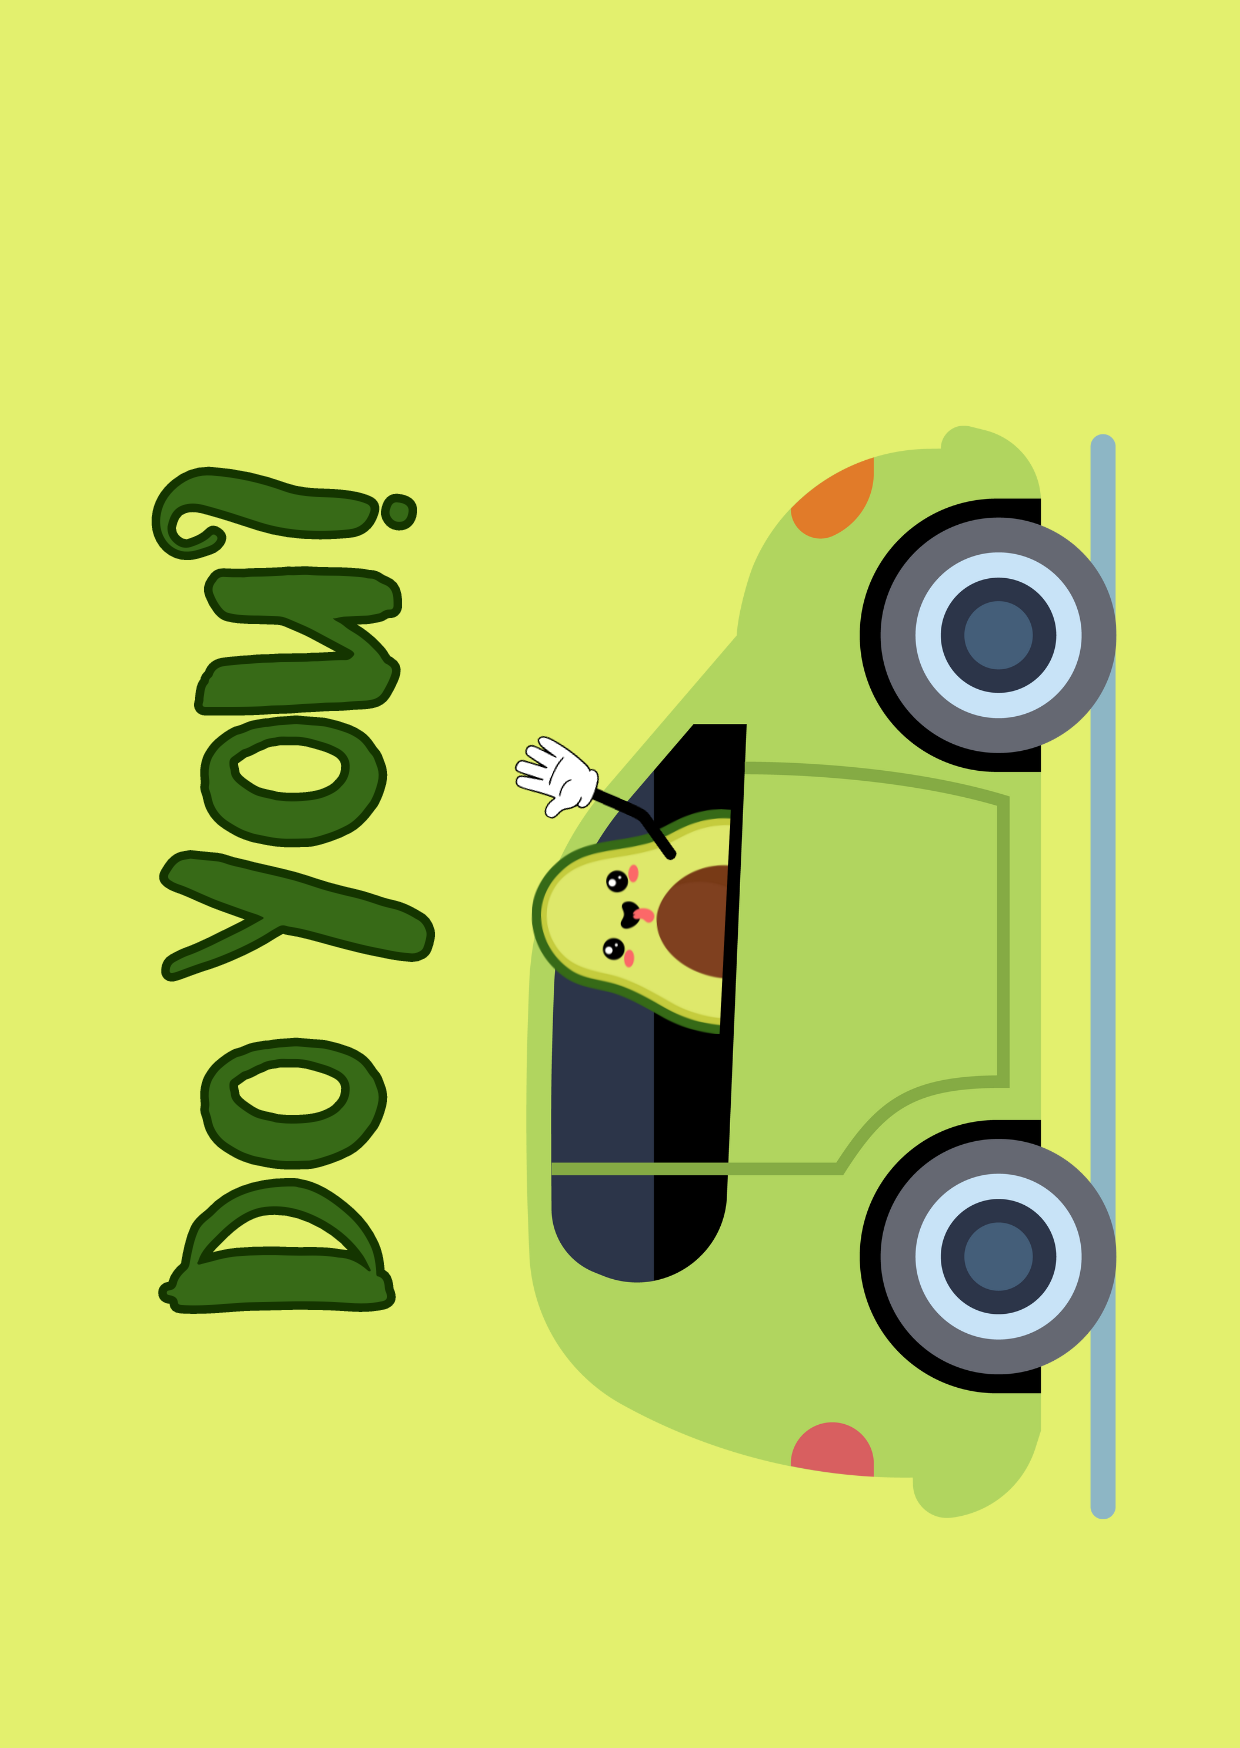 Funny Driving Test Congratulations Greetings Card with Avocado Pun